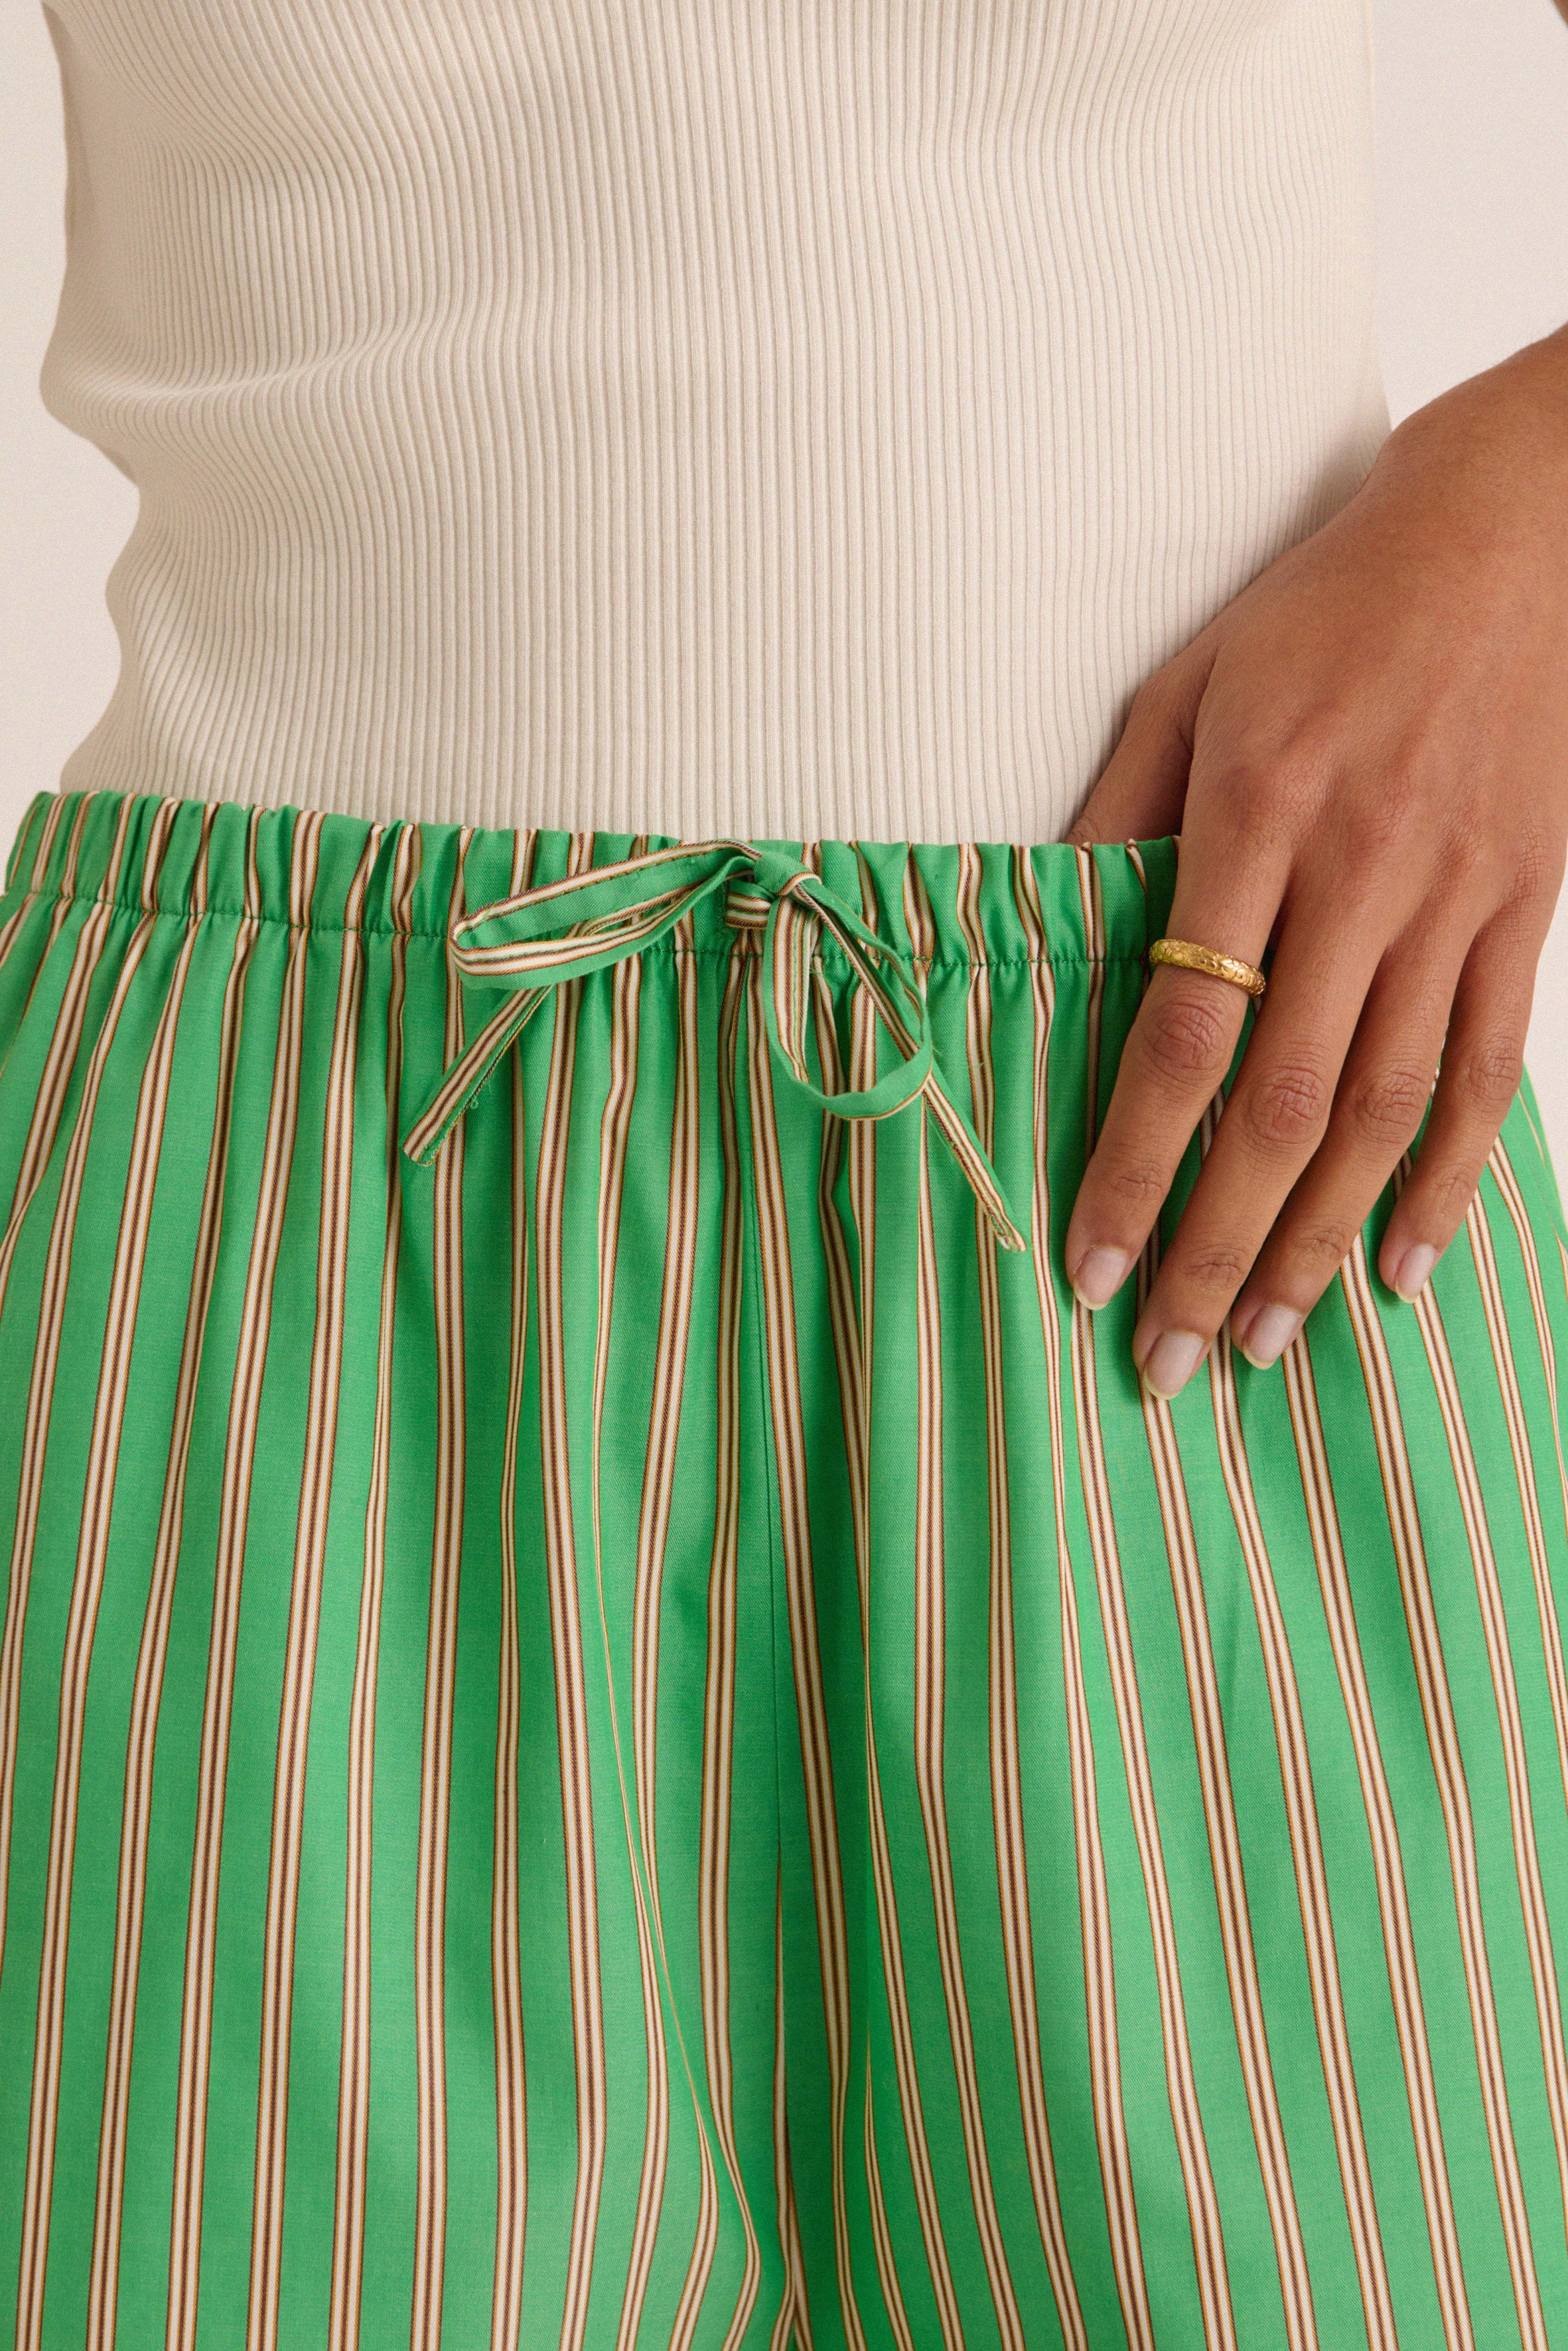 Green and yellow striped Lino shorts